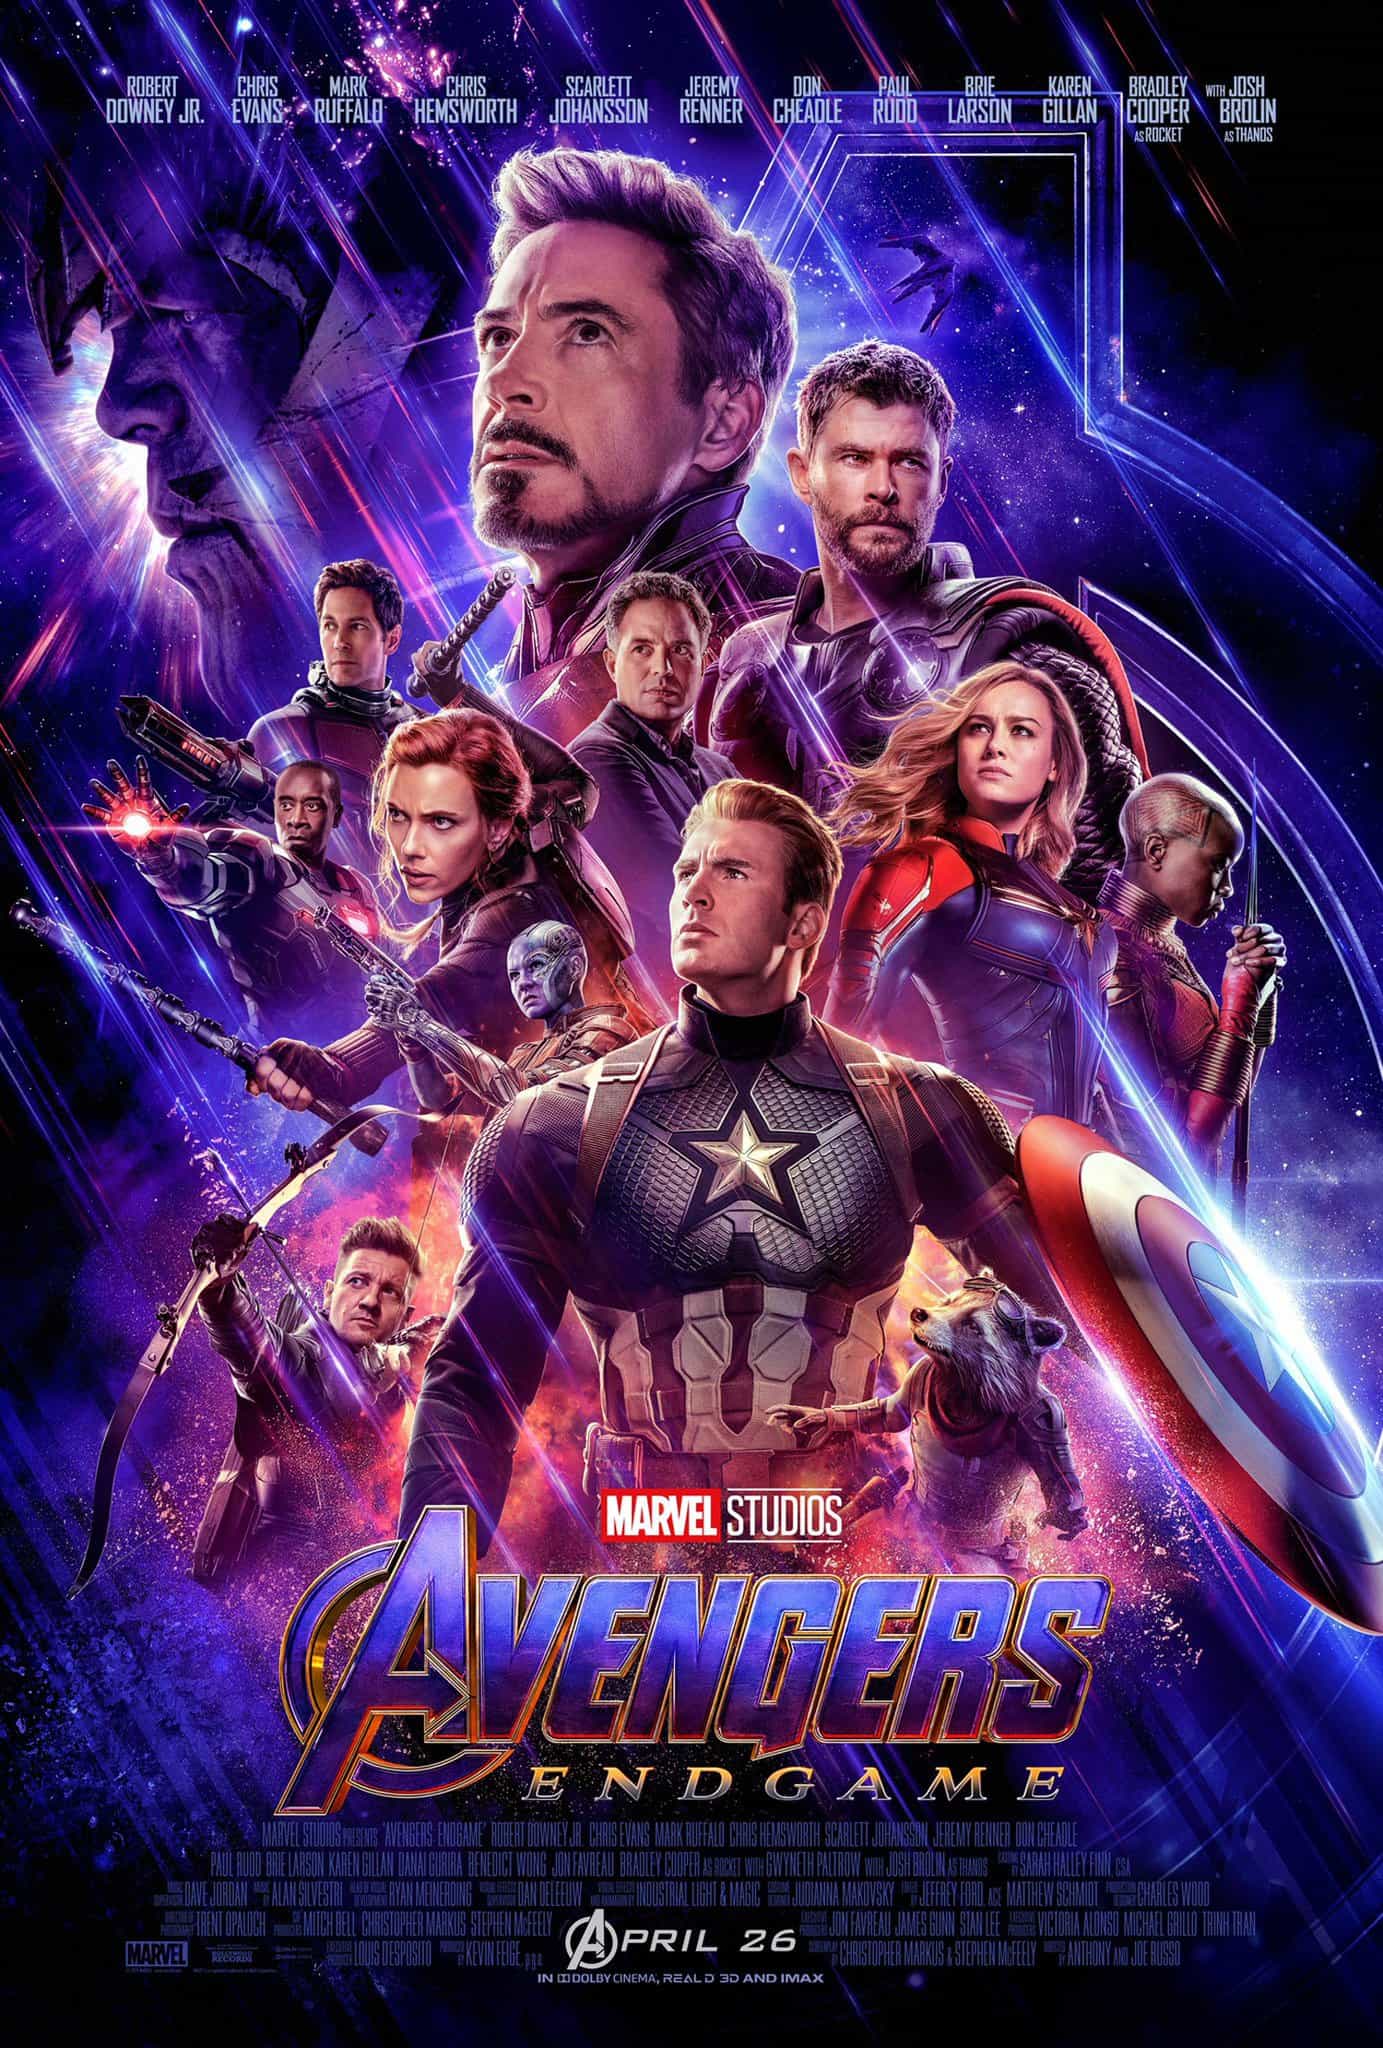 US Box Office Analysis Weekend 10 - 12 May 2019:  Avengers Endgame makes it three weeks at the top giving Pikachu a number 2 debut